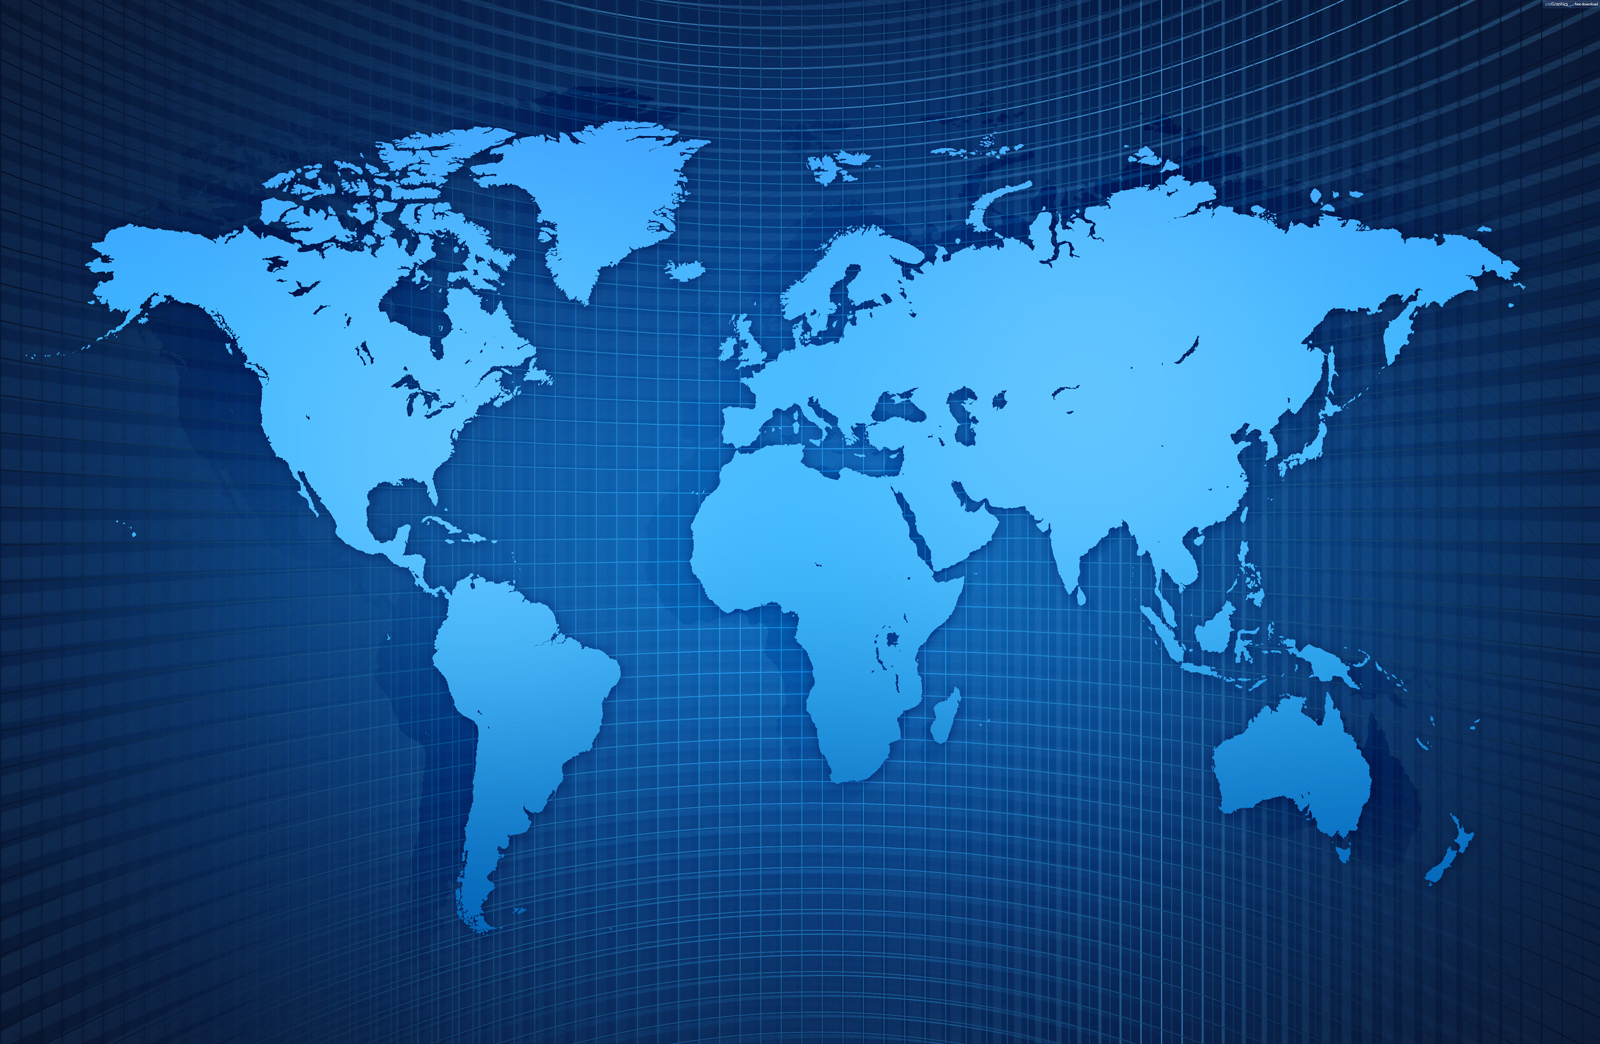 Blue World Map Free Ppt Backgrounds For Your Powerpoint Templates